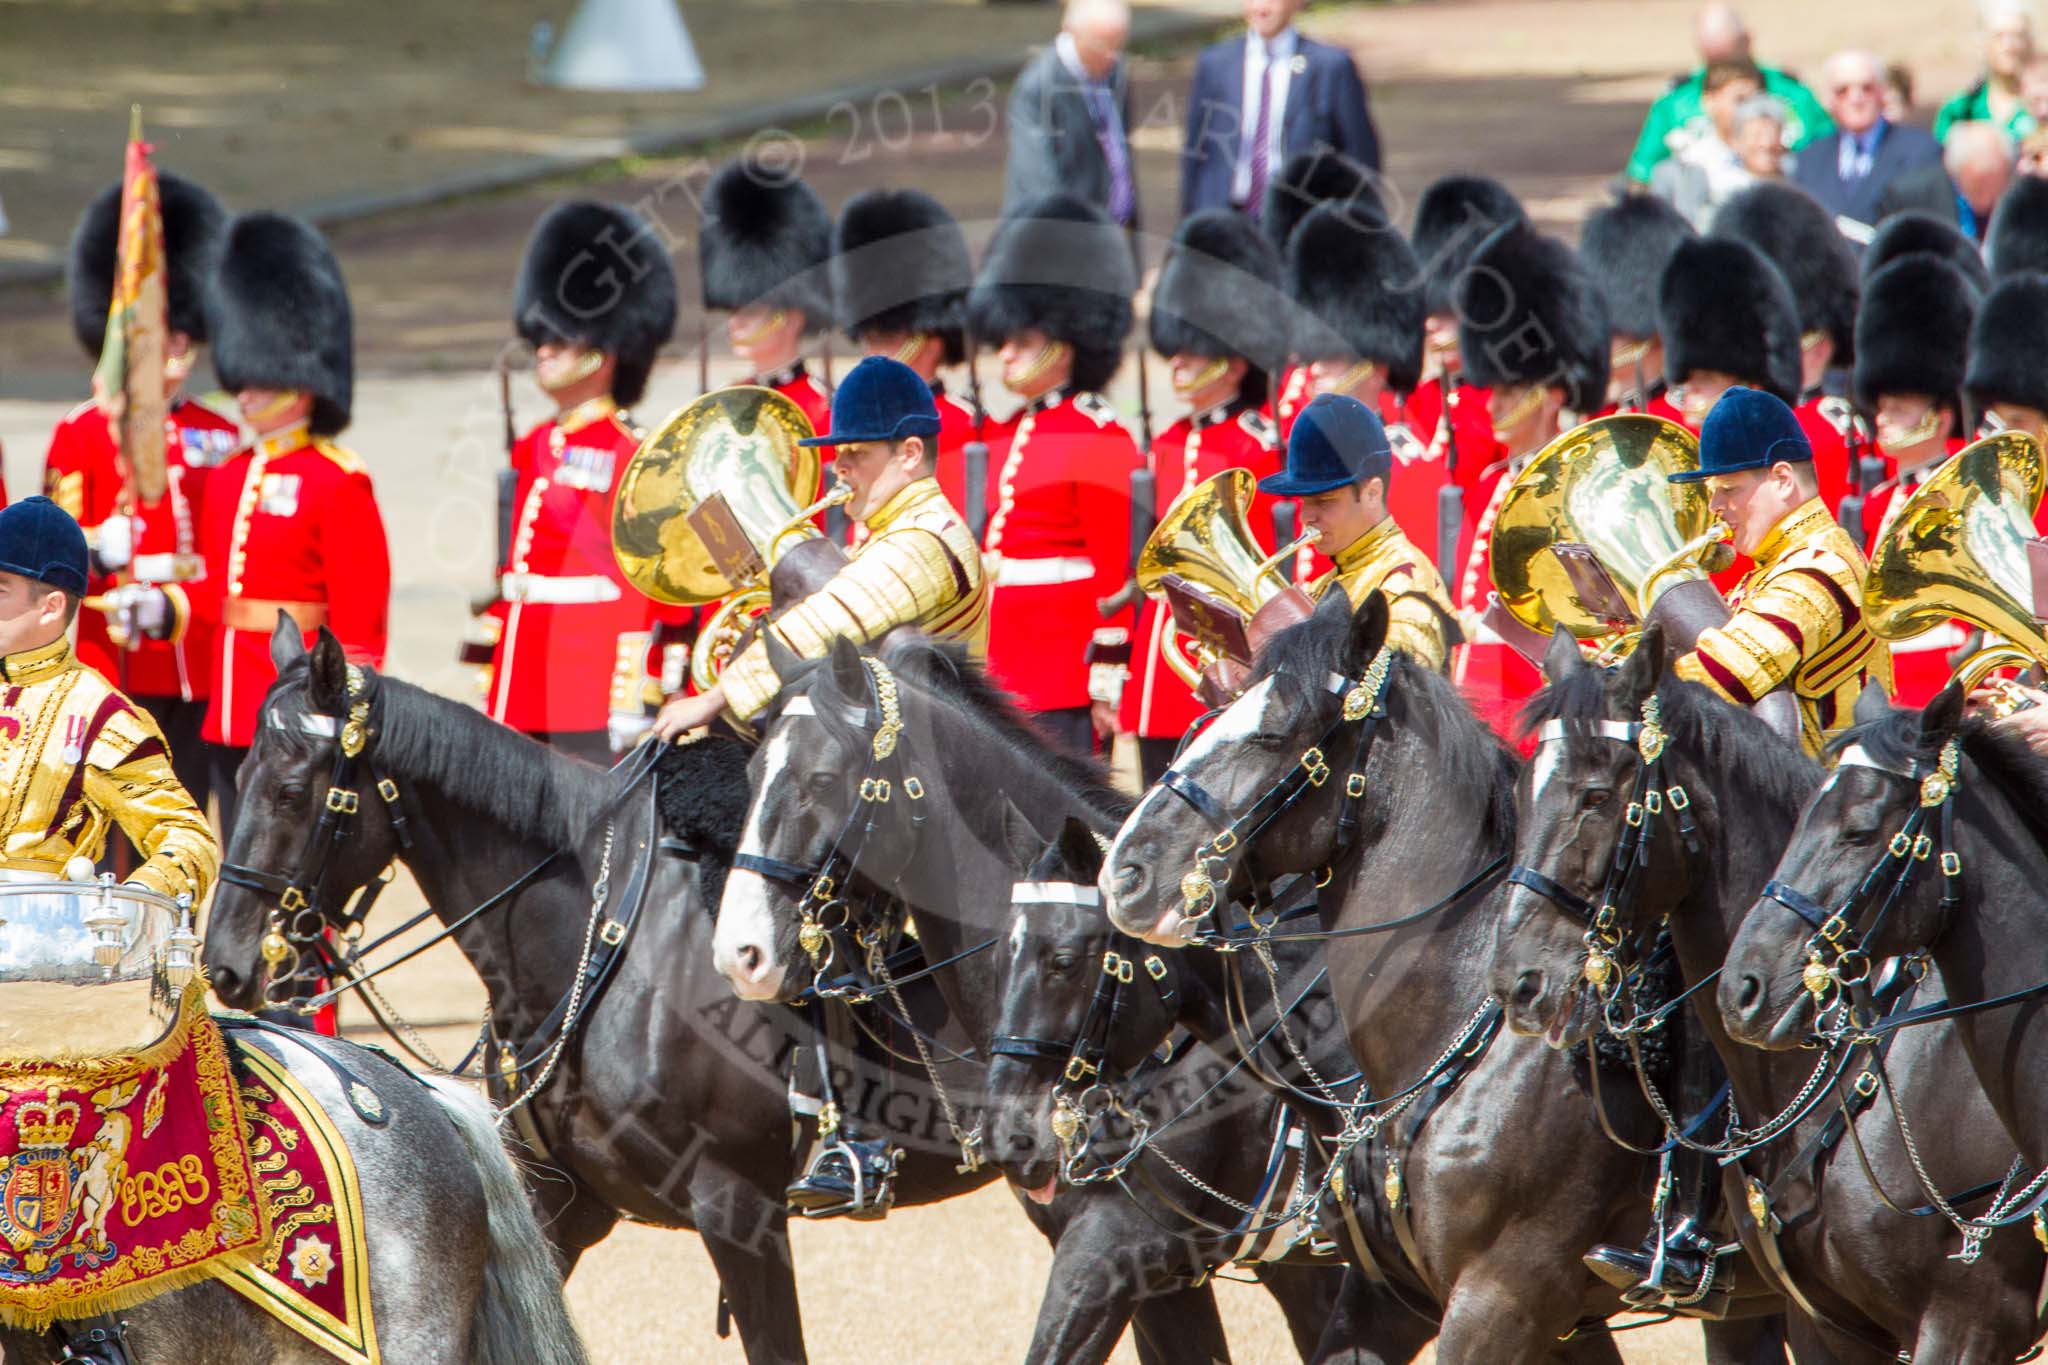 Trooping the Colour 2013: The Ride Past - the Mounted Bands of the Household Cavalry move, from the eastern side, onto Horse Guards Parade. Image #649, 15 June 2013 11:52 Horse Guards Parade, London, UK